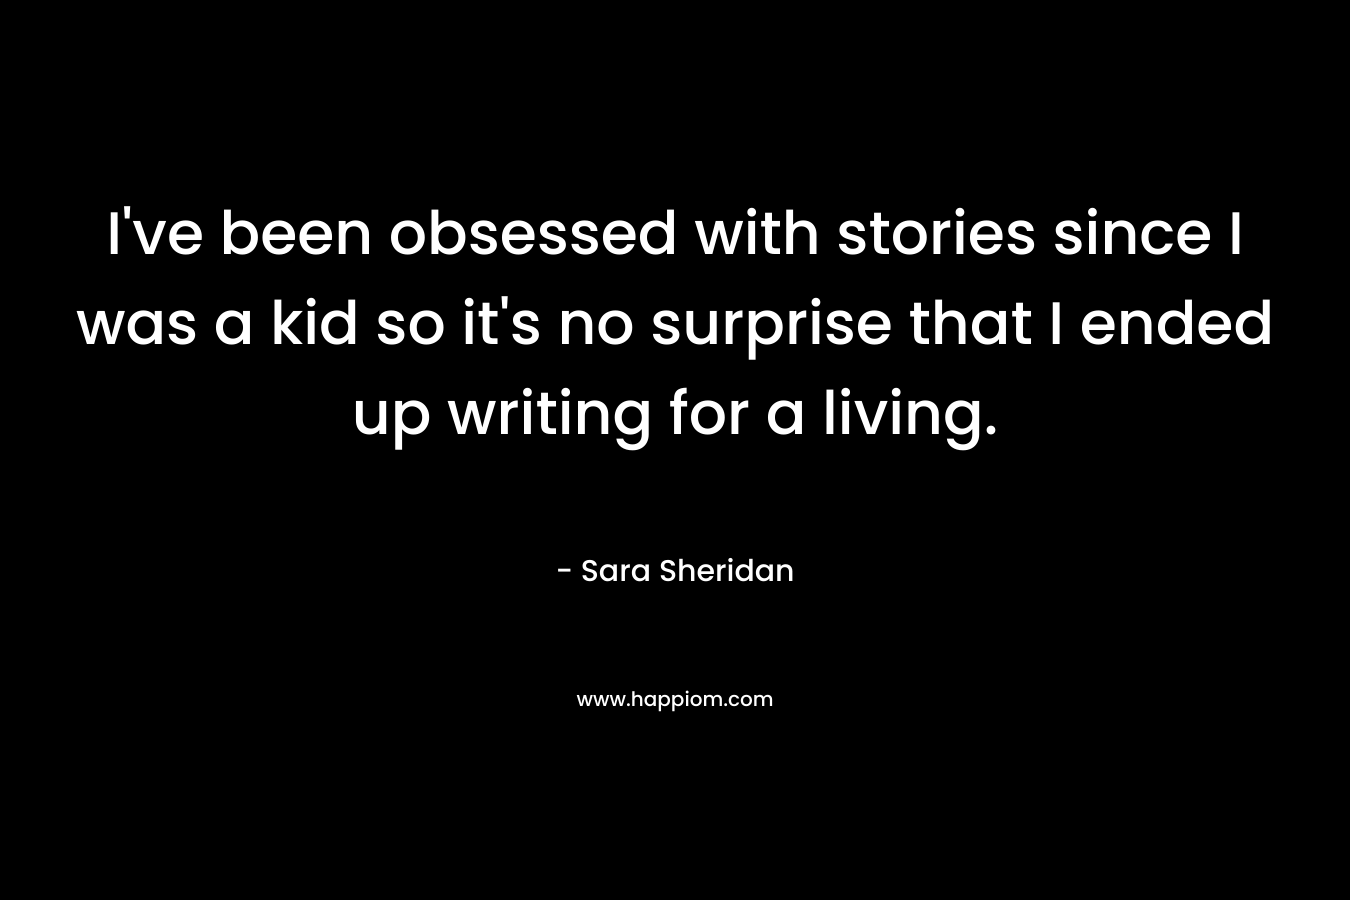 I've been obsessed with stories since I was a kid so it's no surprise that I ended up writing for a living.